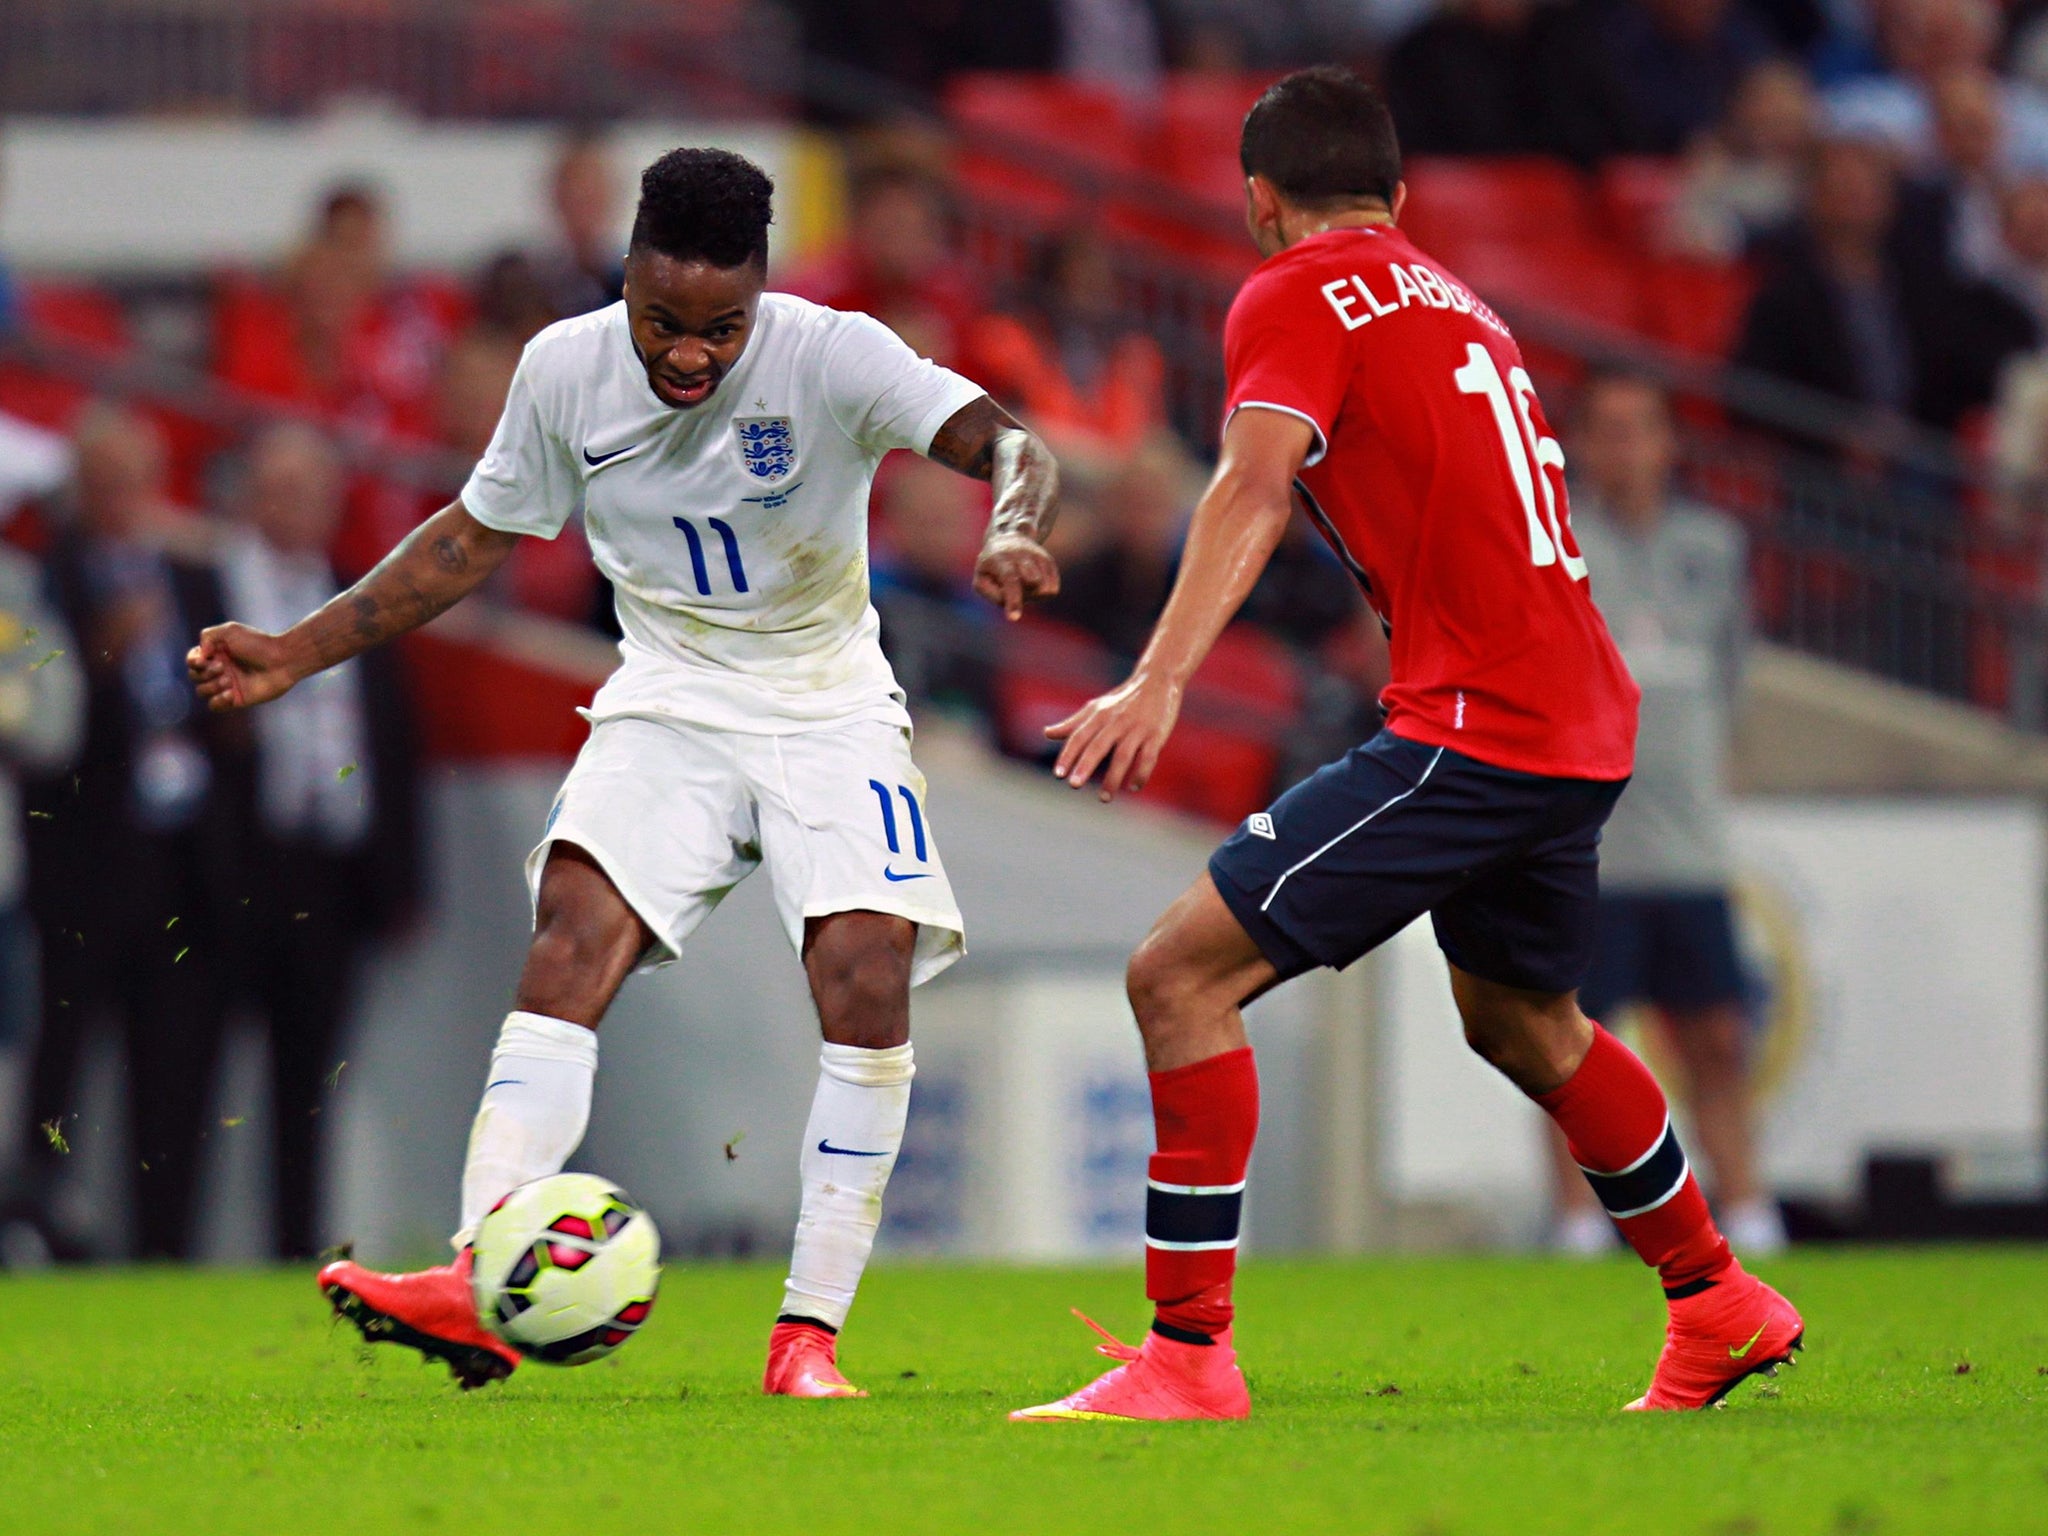 Raheem Sterling made England’s main impact against Norway